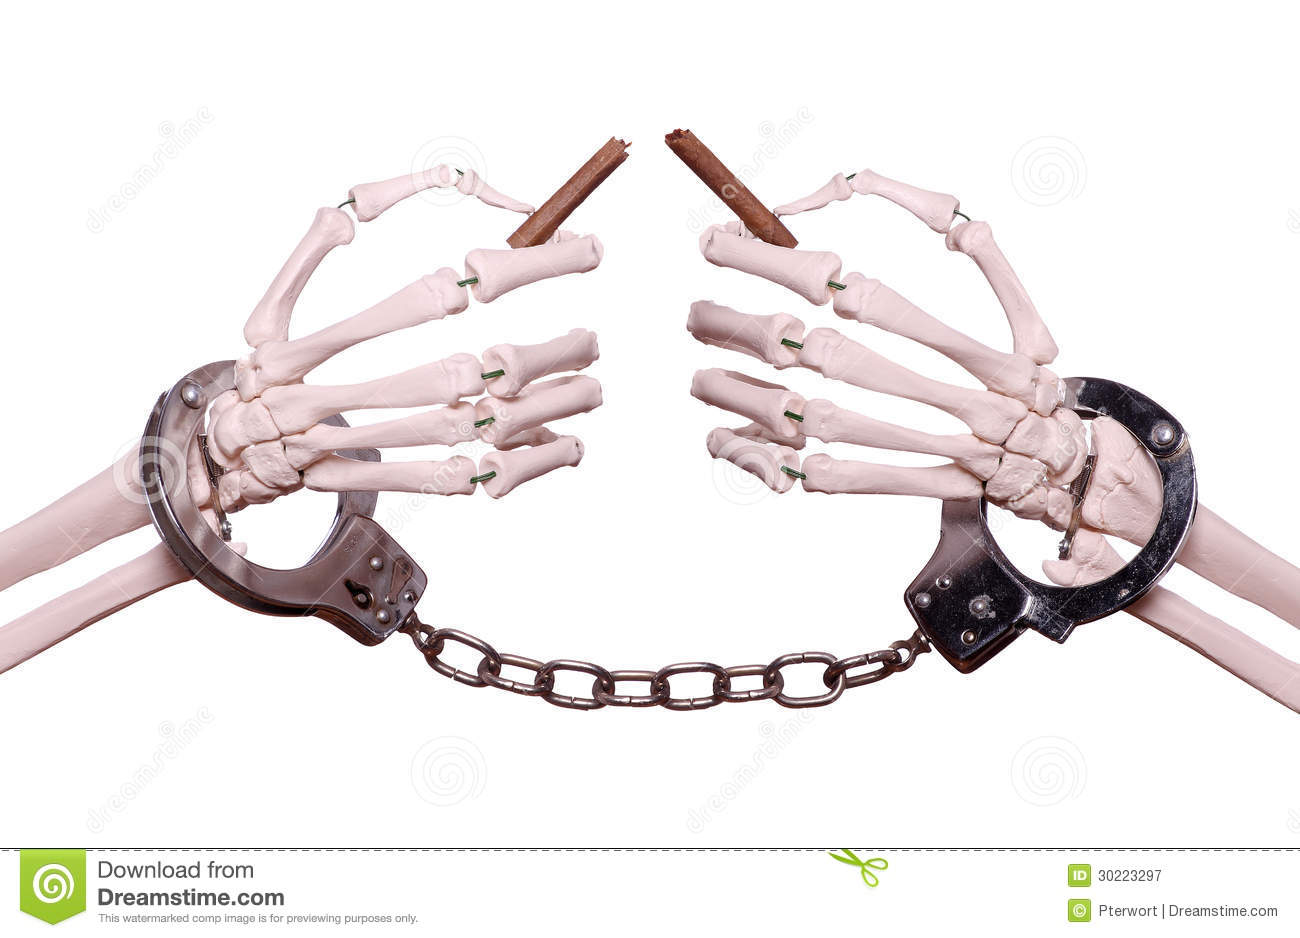 Skeleton Hands With Handcuff Holding Broken Cigar Royalty Free Stock